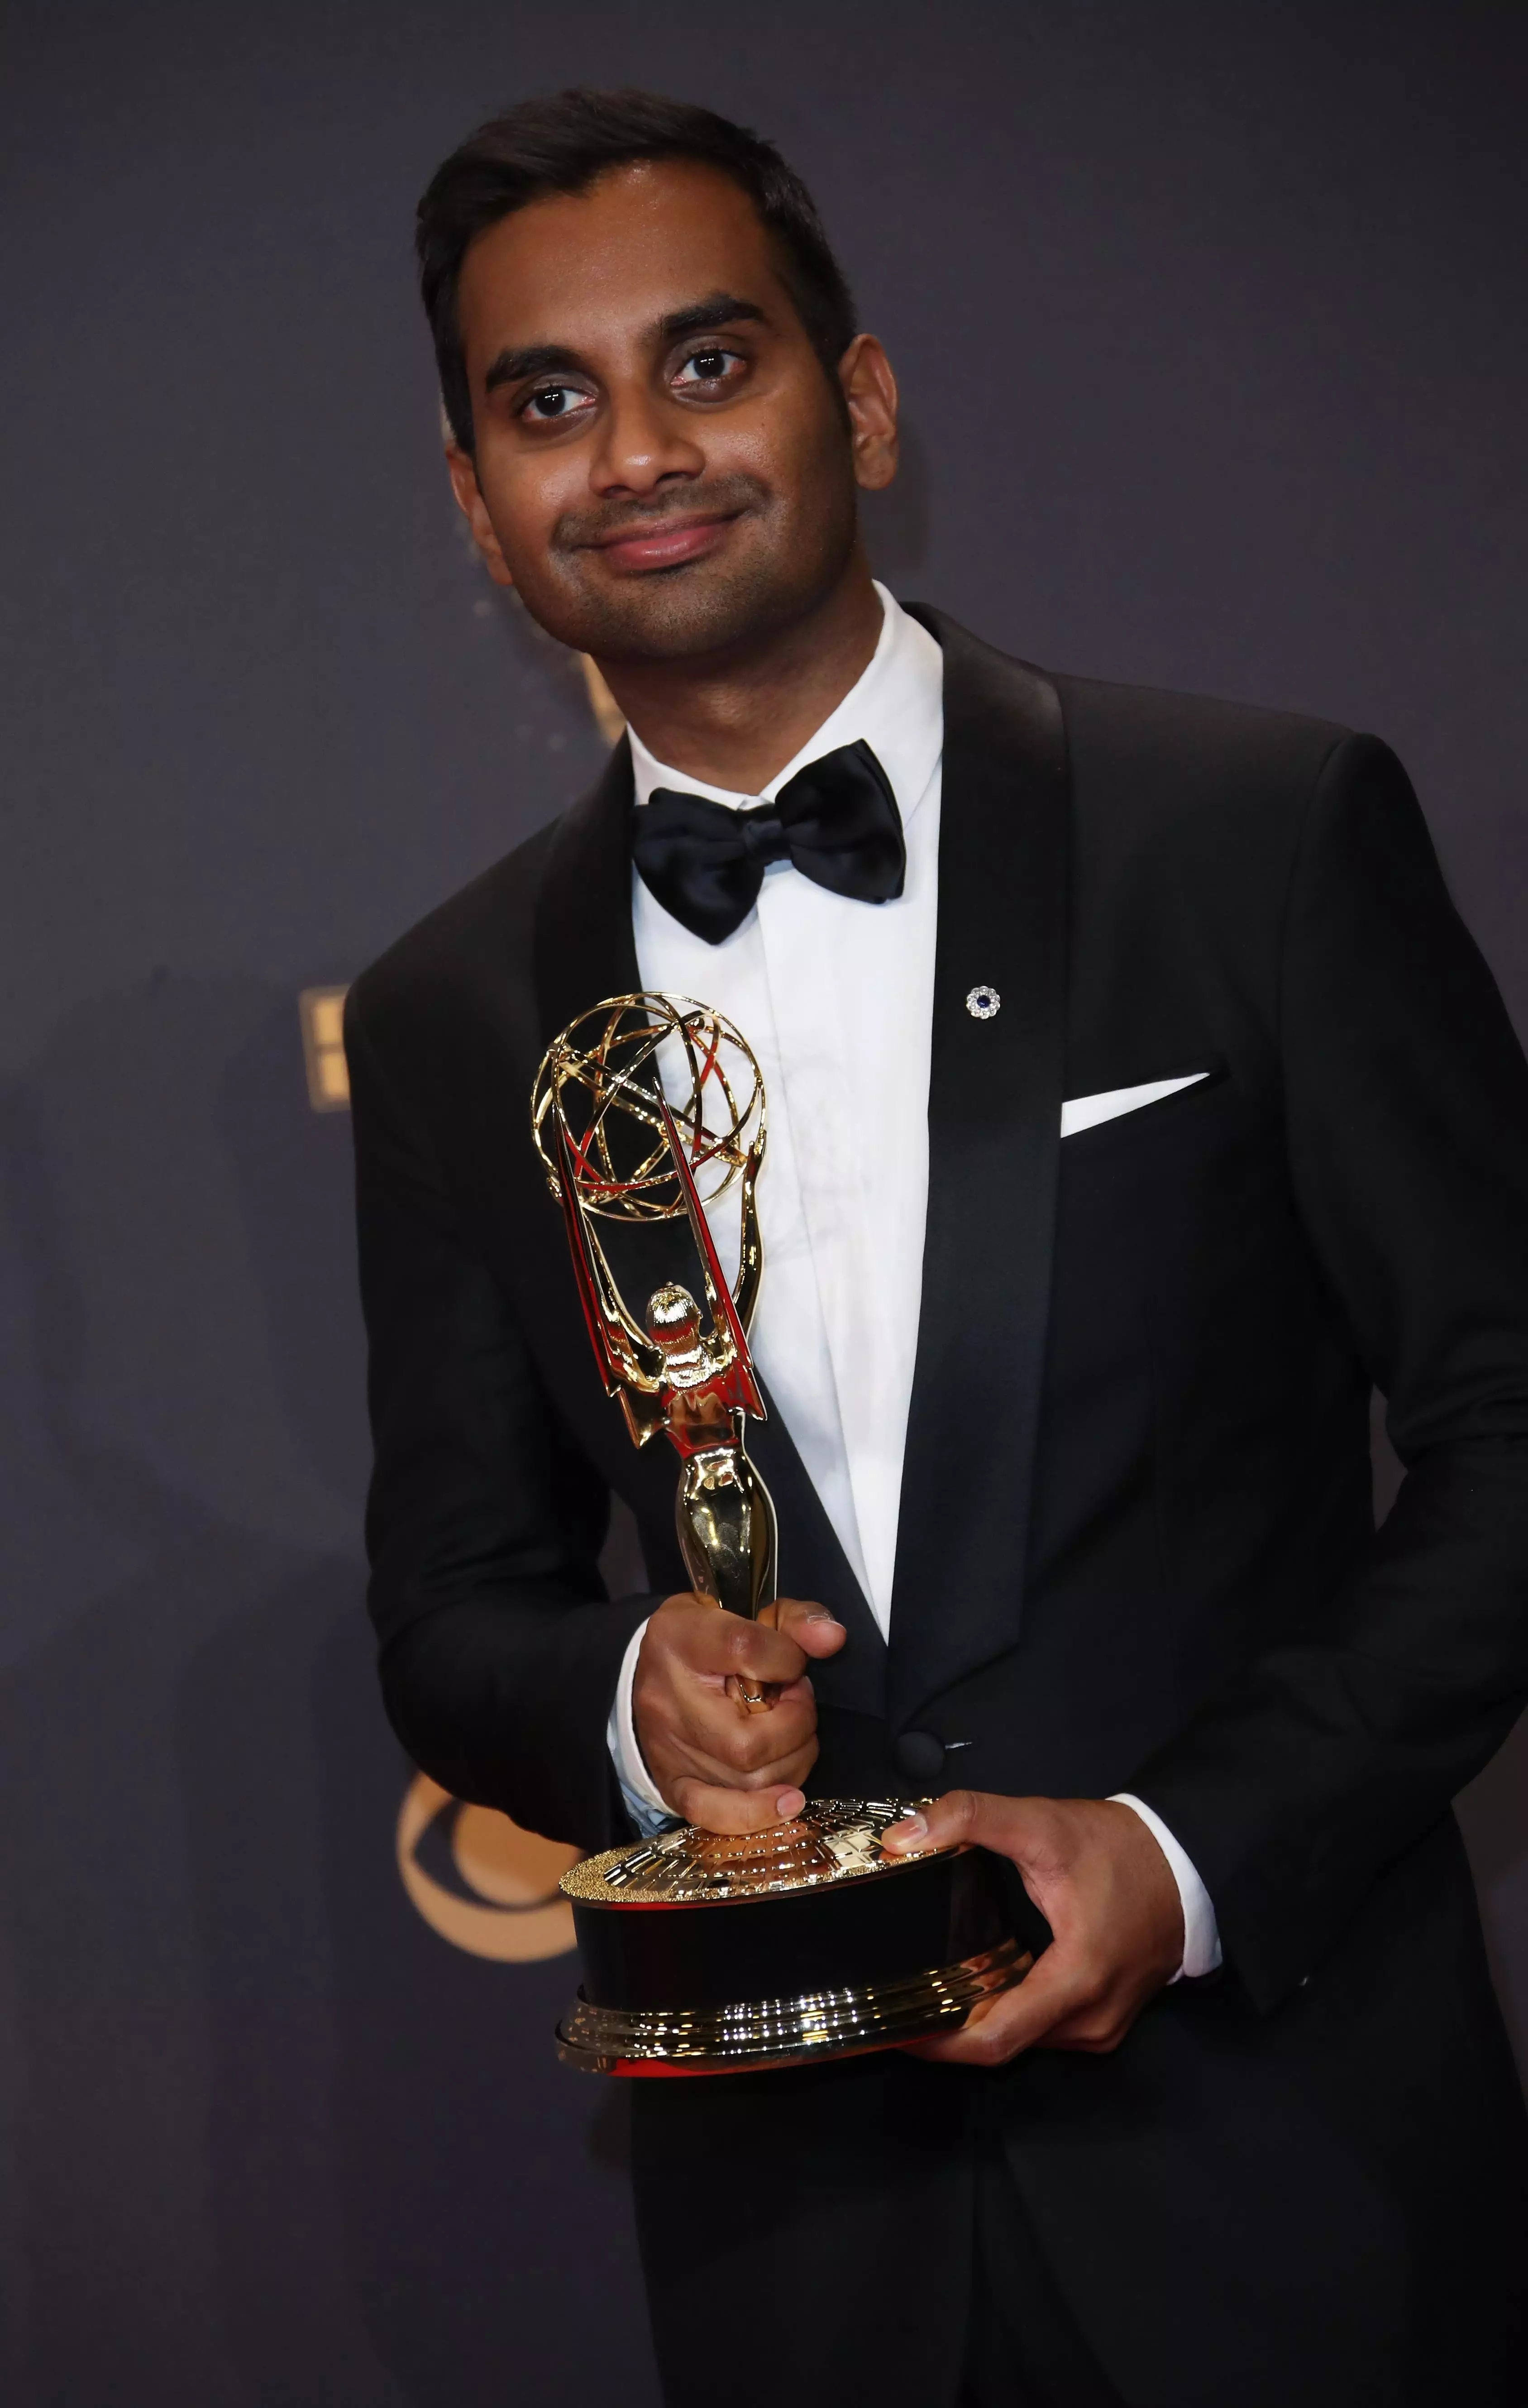 Aziz won an Emmy last year for Outstanding Writing for a Comedy Series for 'Master of None'.